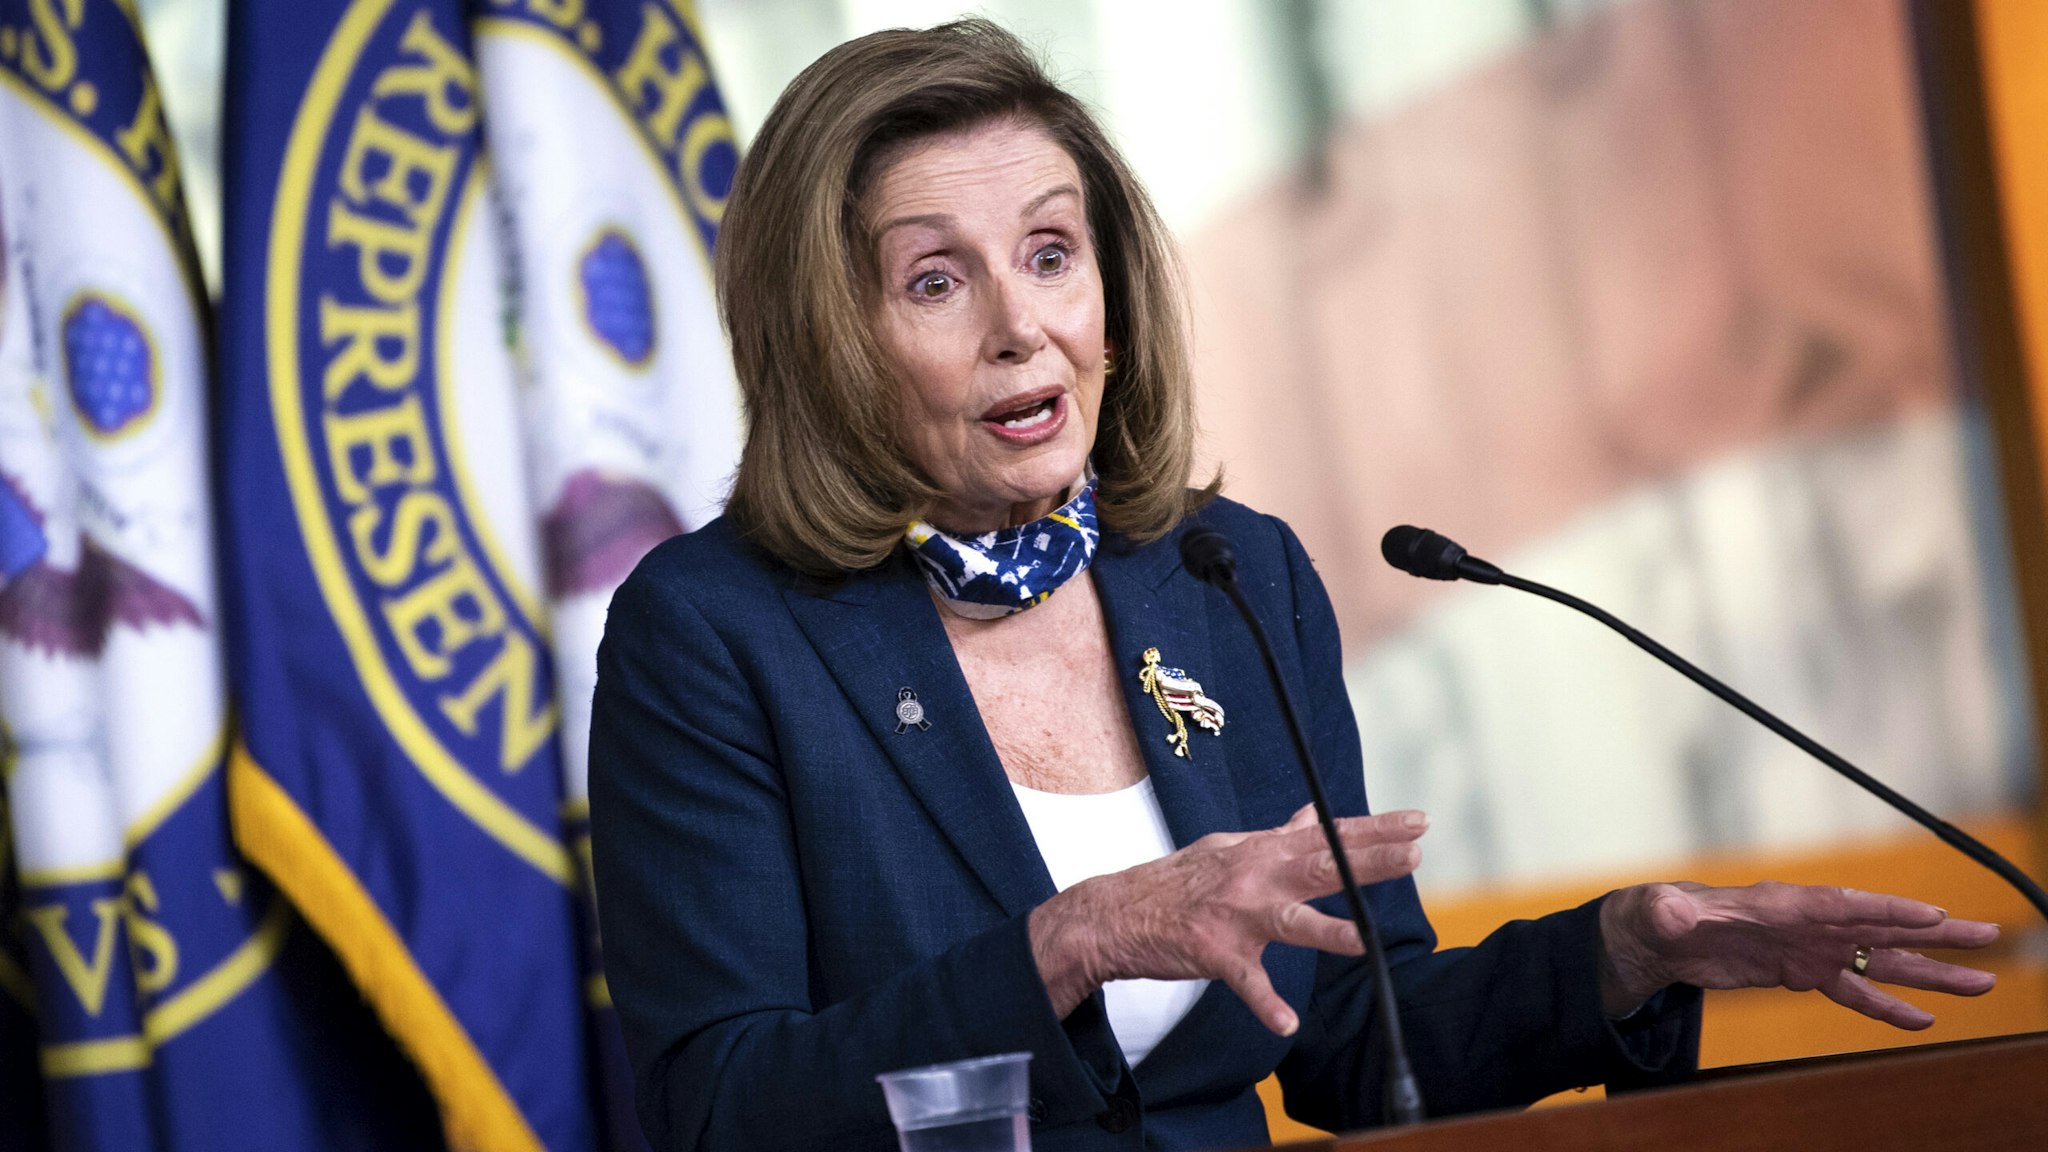 UNITED STATES - SEPTEMBER 10: Speaker of the House Nancy Pelosi, D-Calif., speaks during her weekly news conference in the Capitol on Thursday, Sept. 10, 2020.